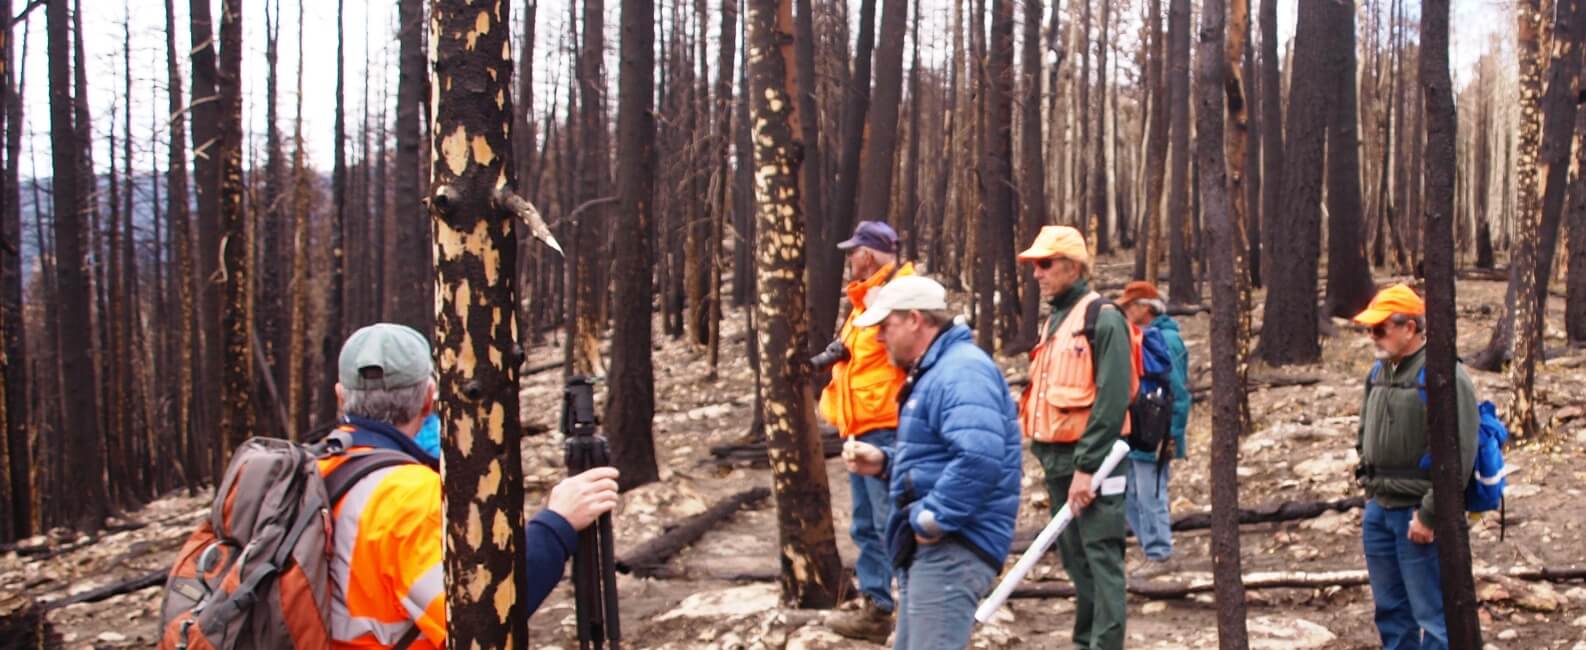 Controversy Over Forest Recovery Efforts Post-Fire